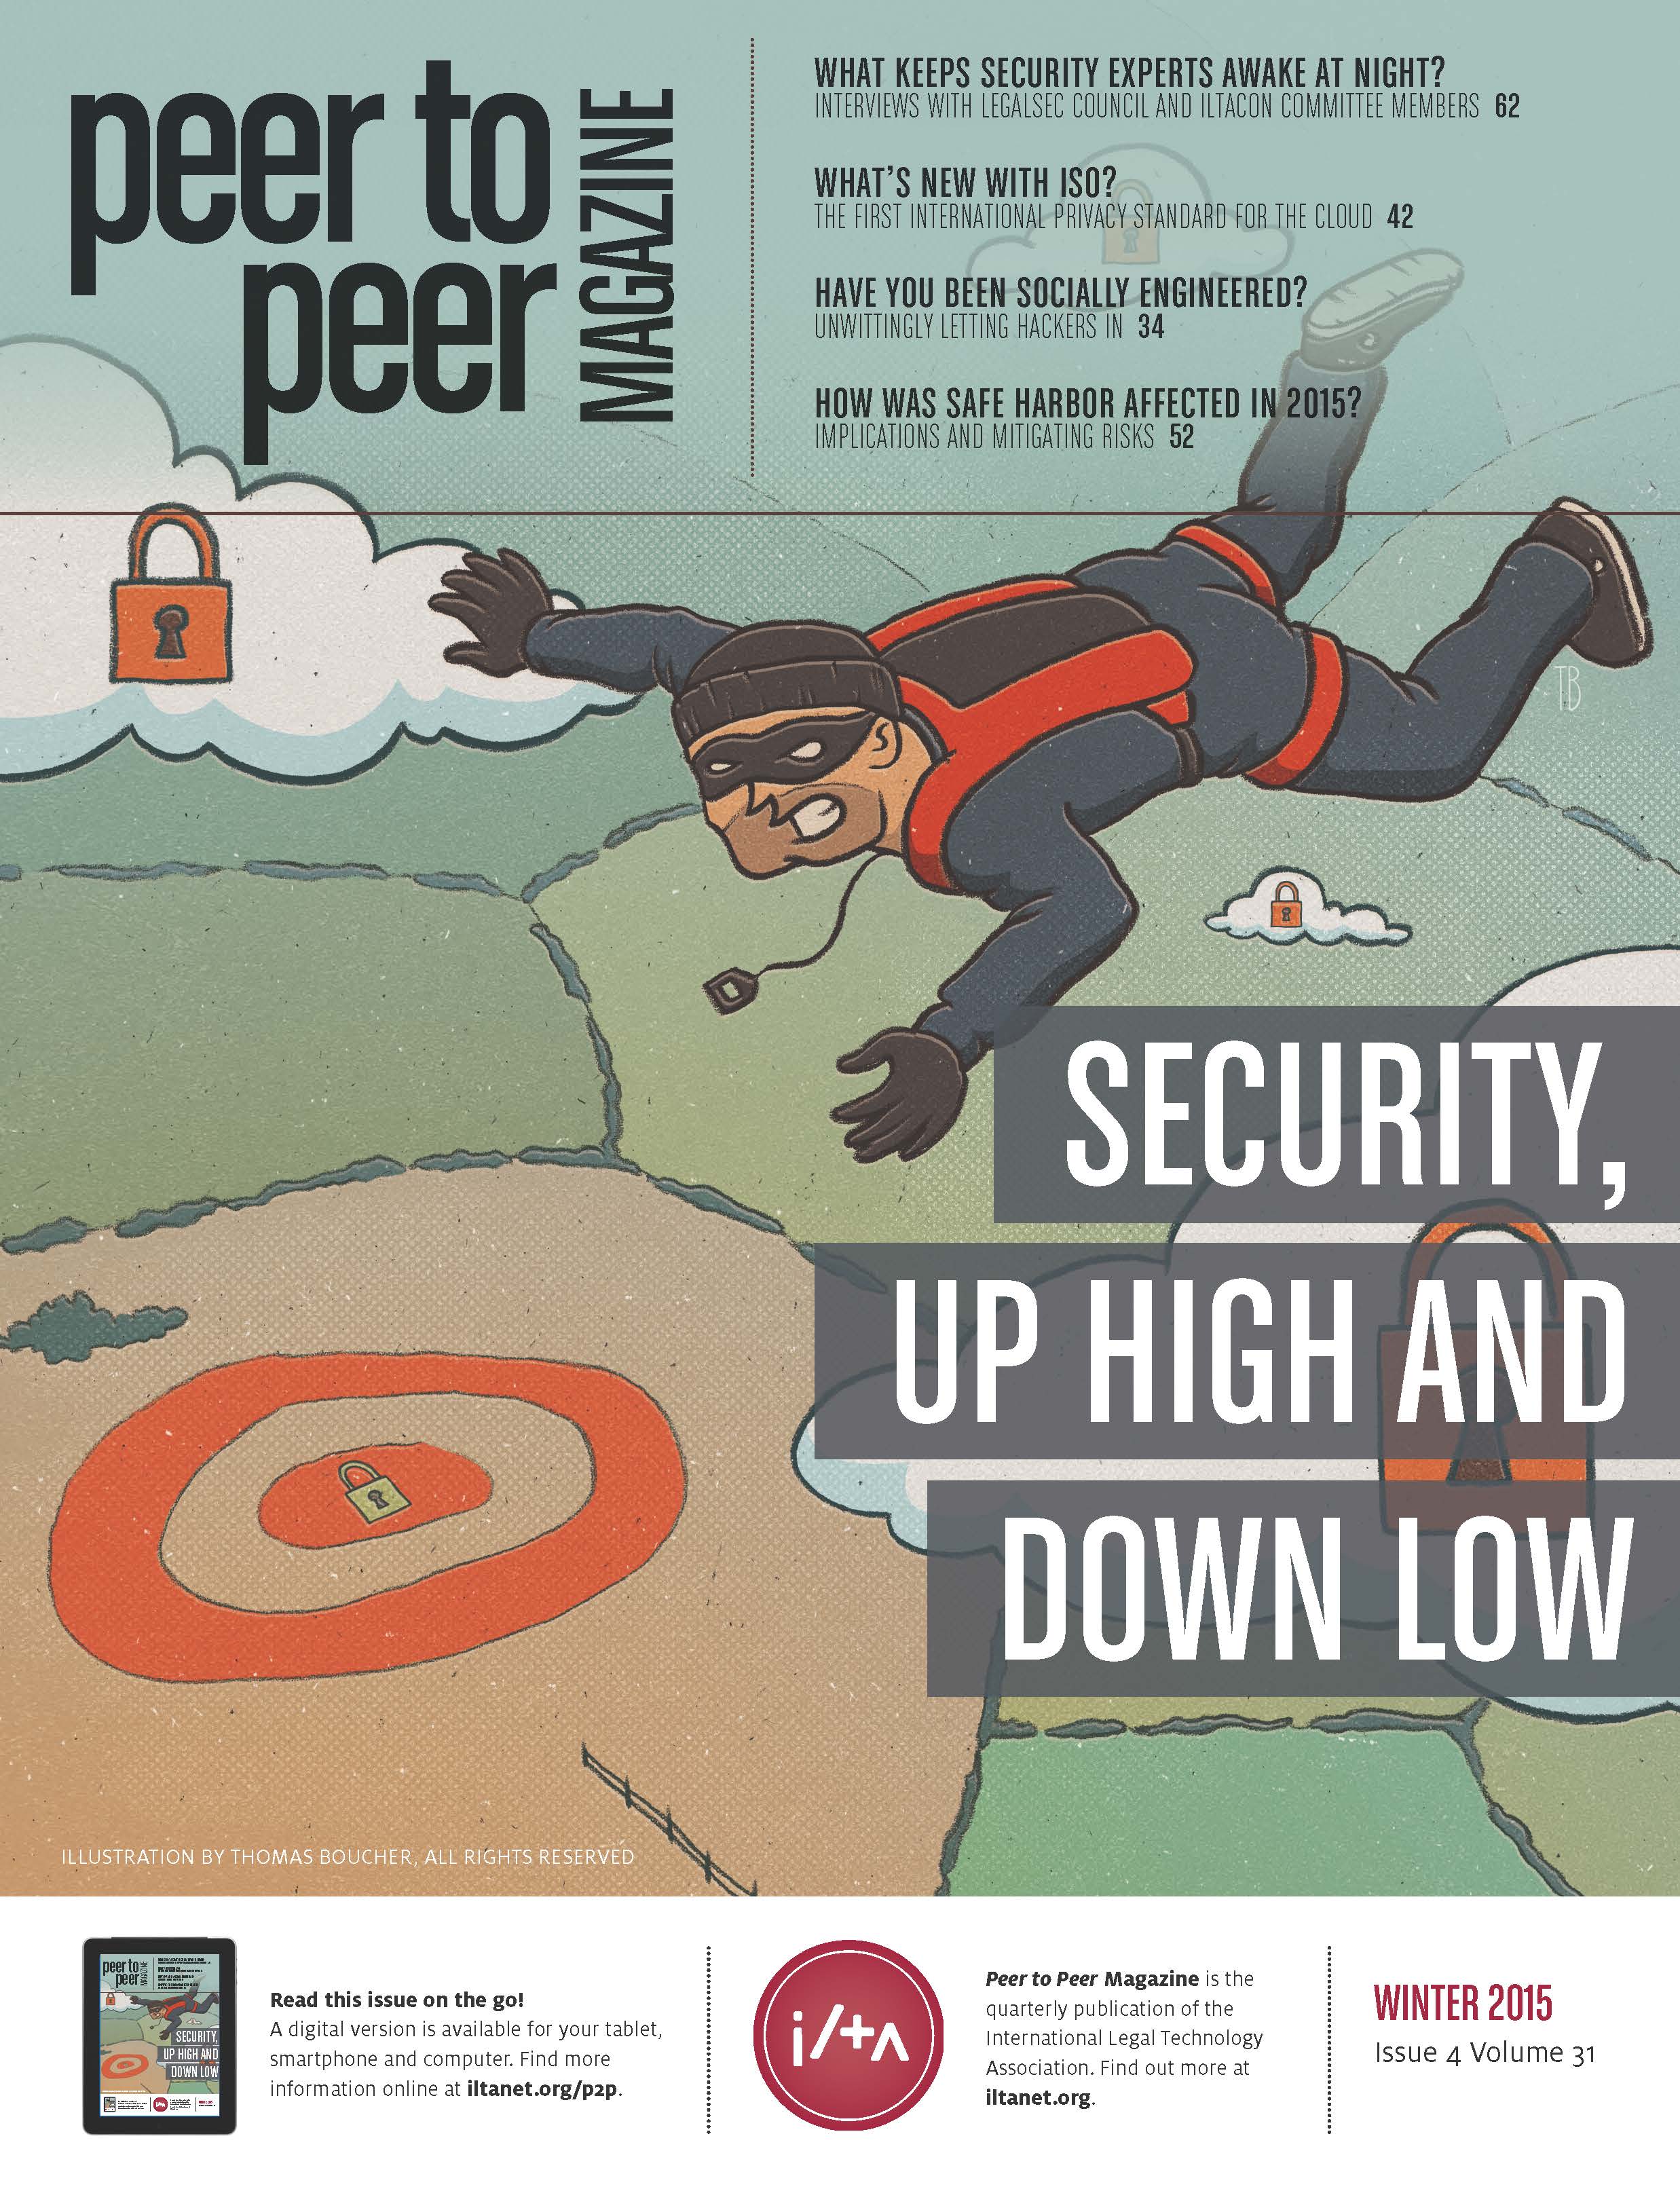 What Keeps Security Experts Awake at Night? Interview with Peter Mills